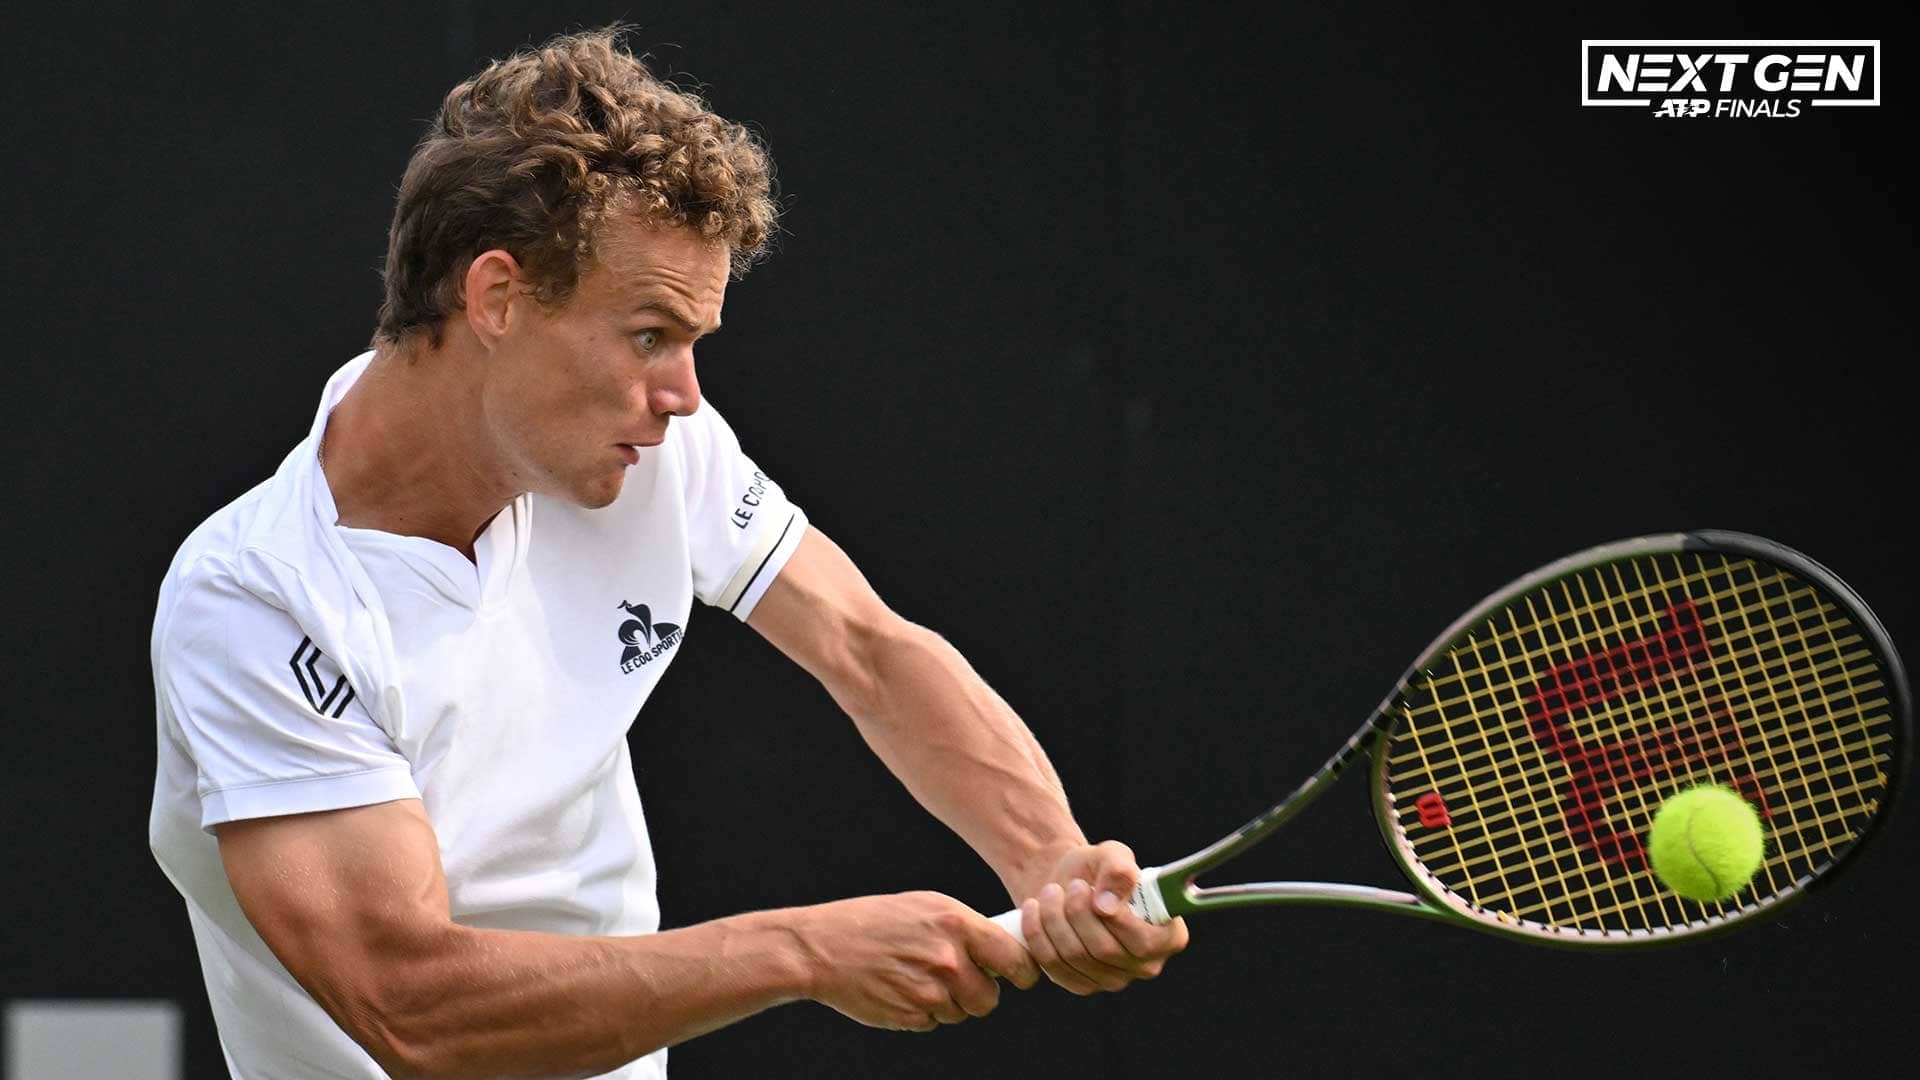 The 19-year-old Luca Van Assche has won two ATP Challenger Tour titles this season.